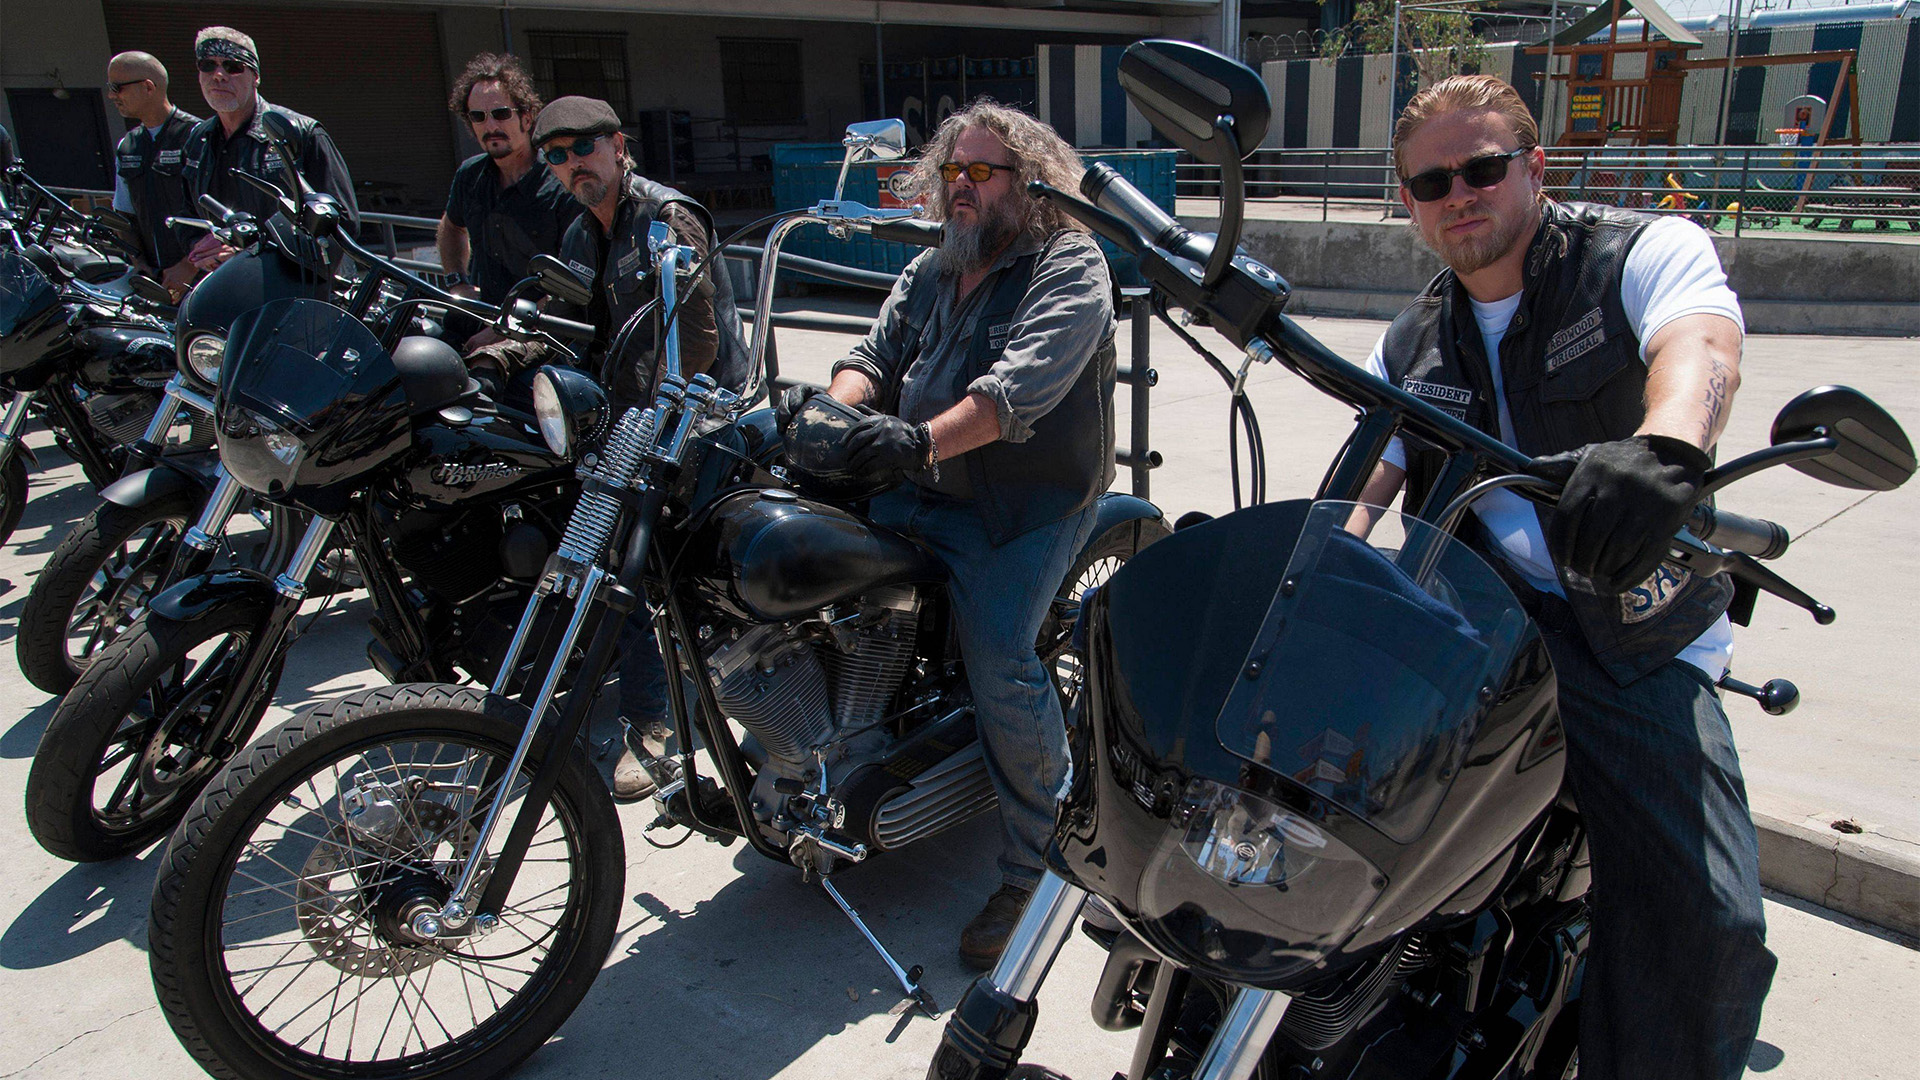 Sons Of Anarchy Full HD Wallpaper and Background Image | 1920x1080 | ID